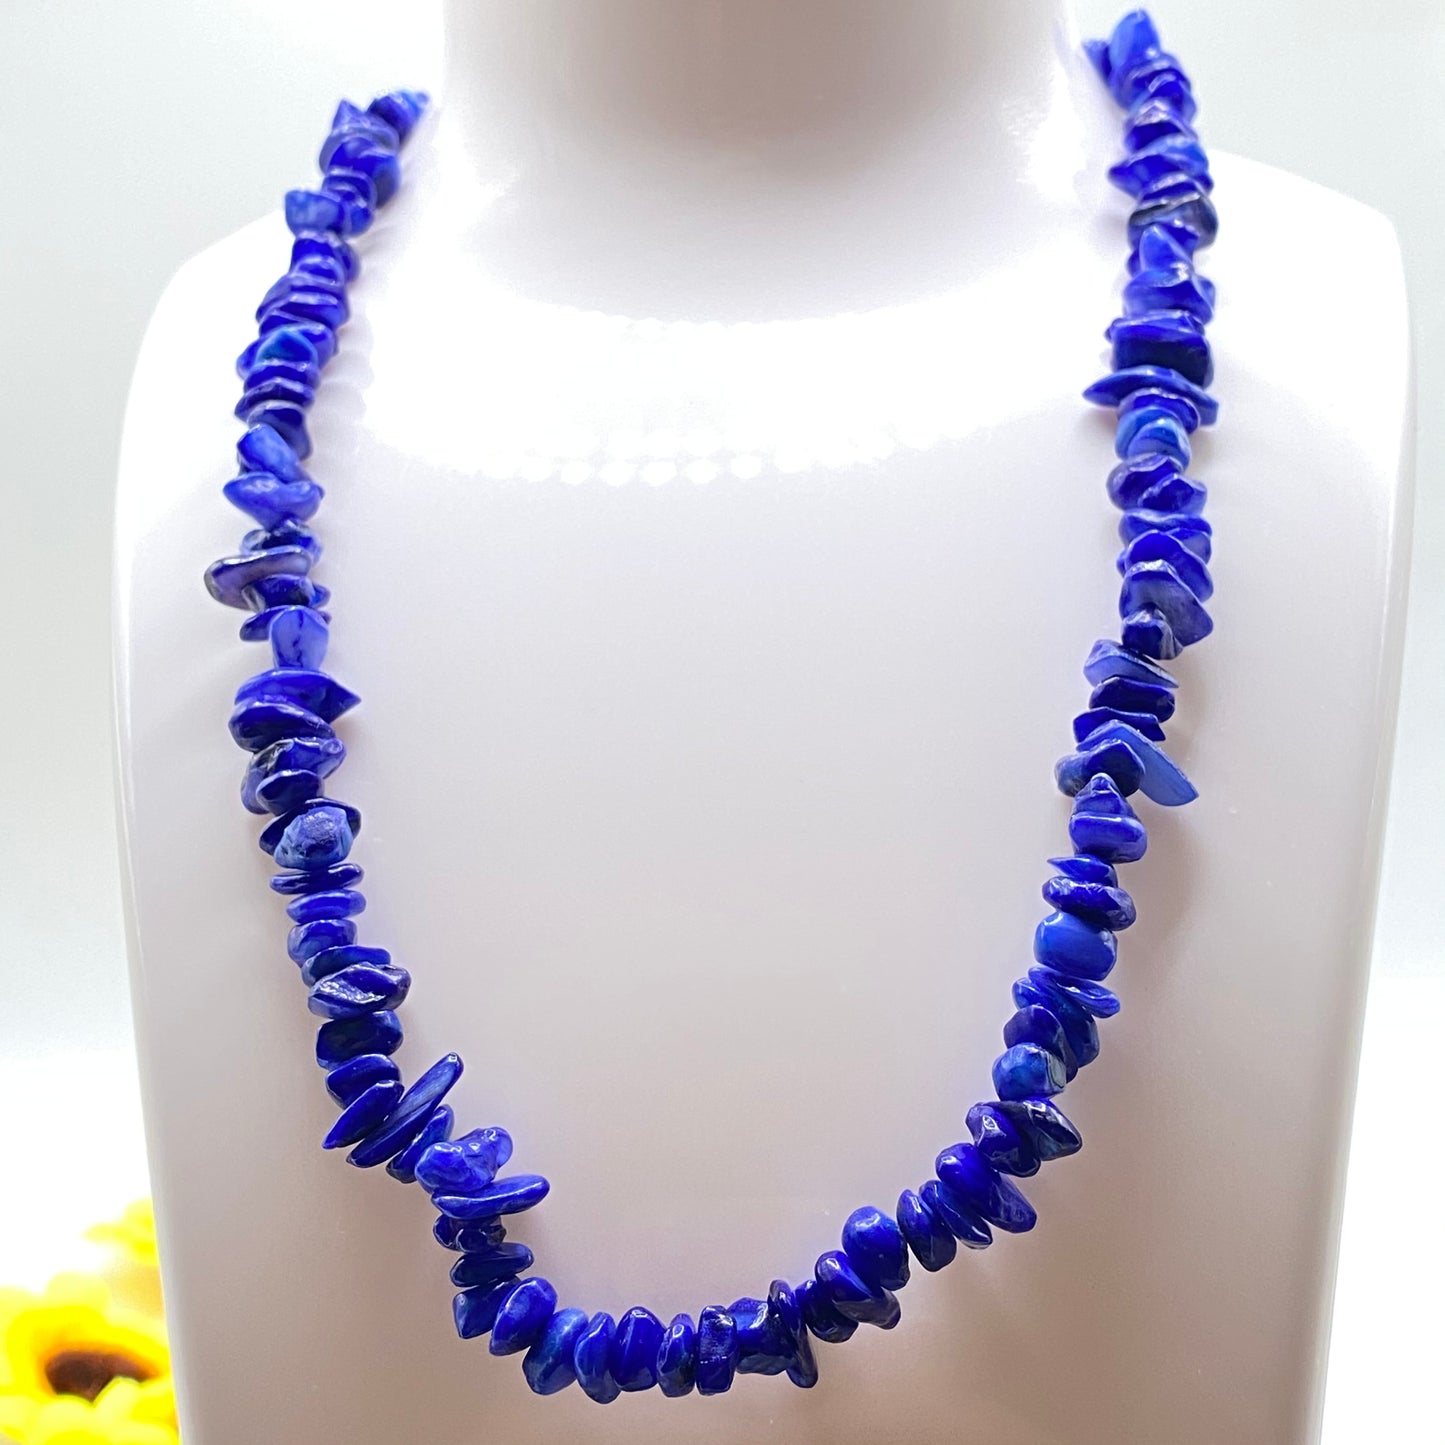 Blue Sodalite Crystal Necklace